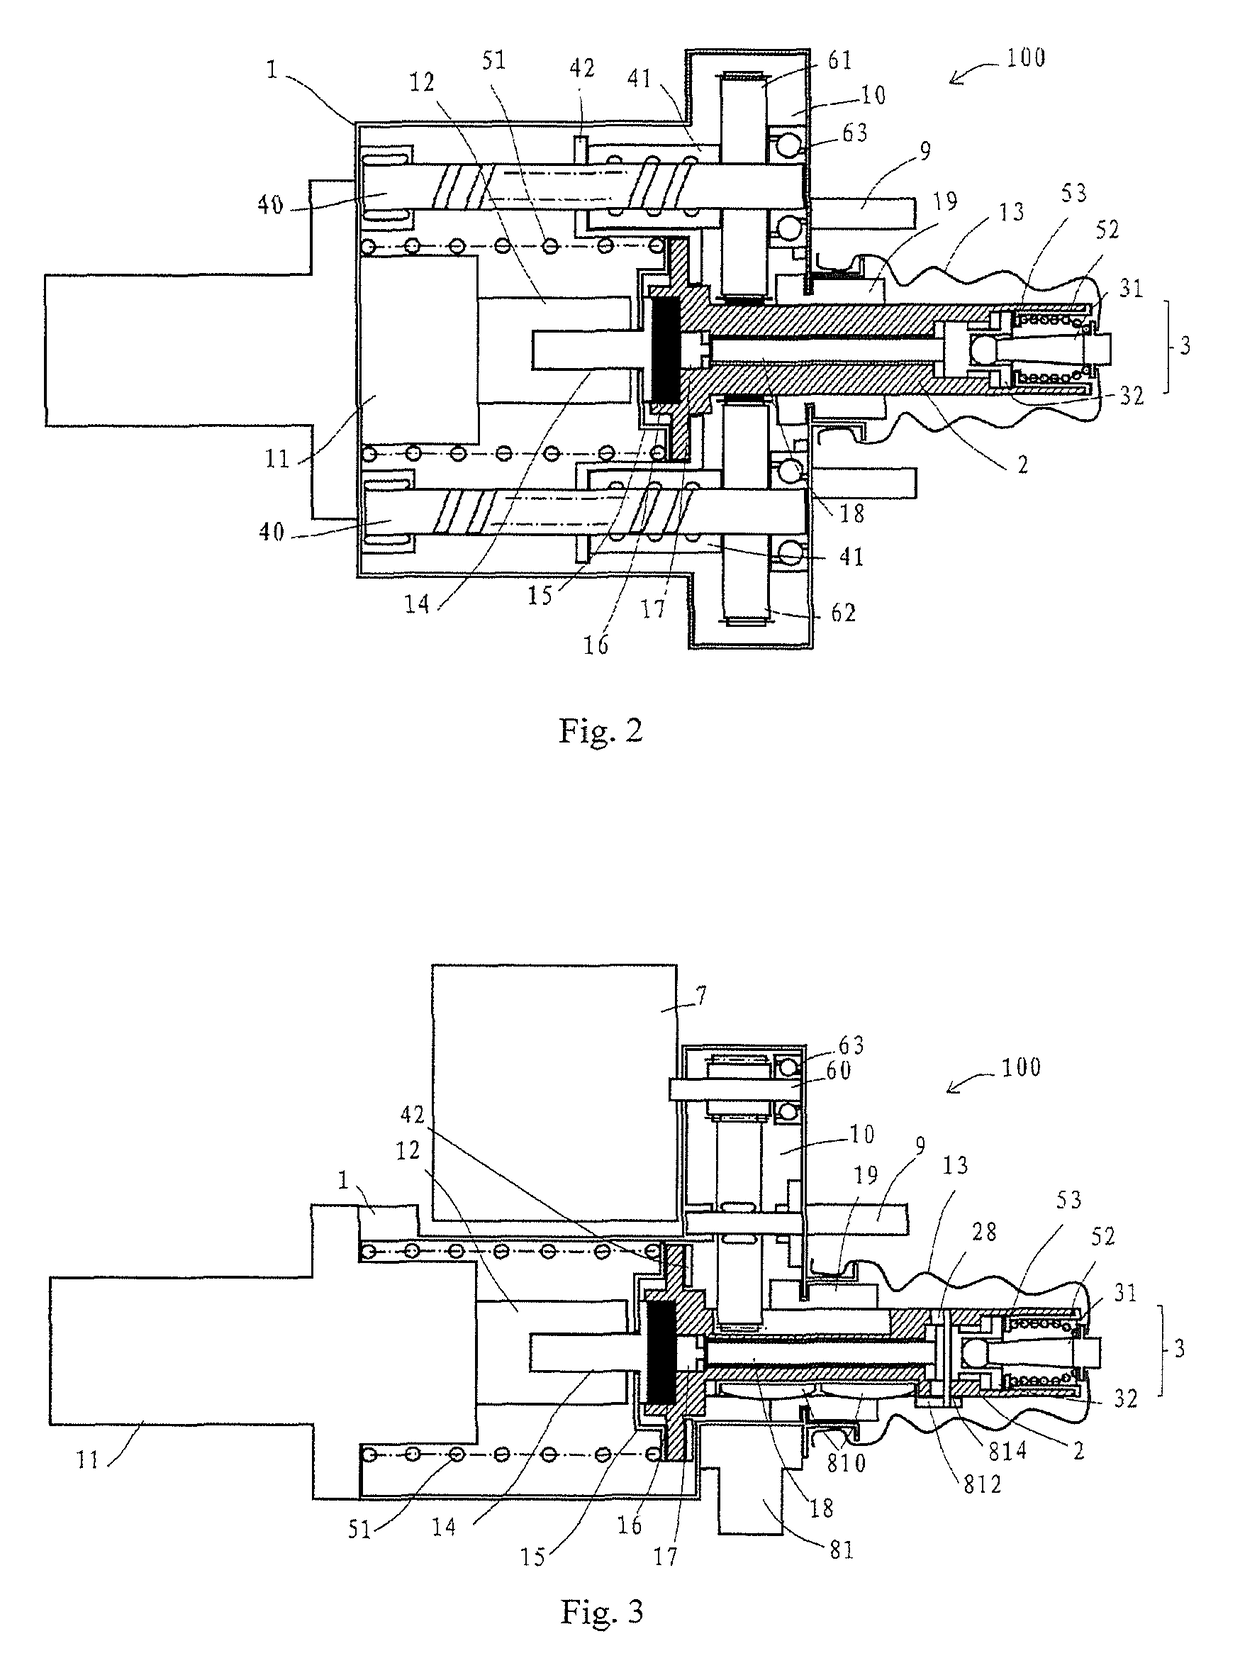 Power assist device and brake system